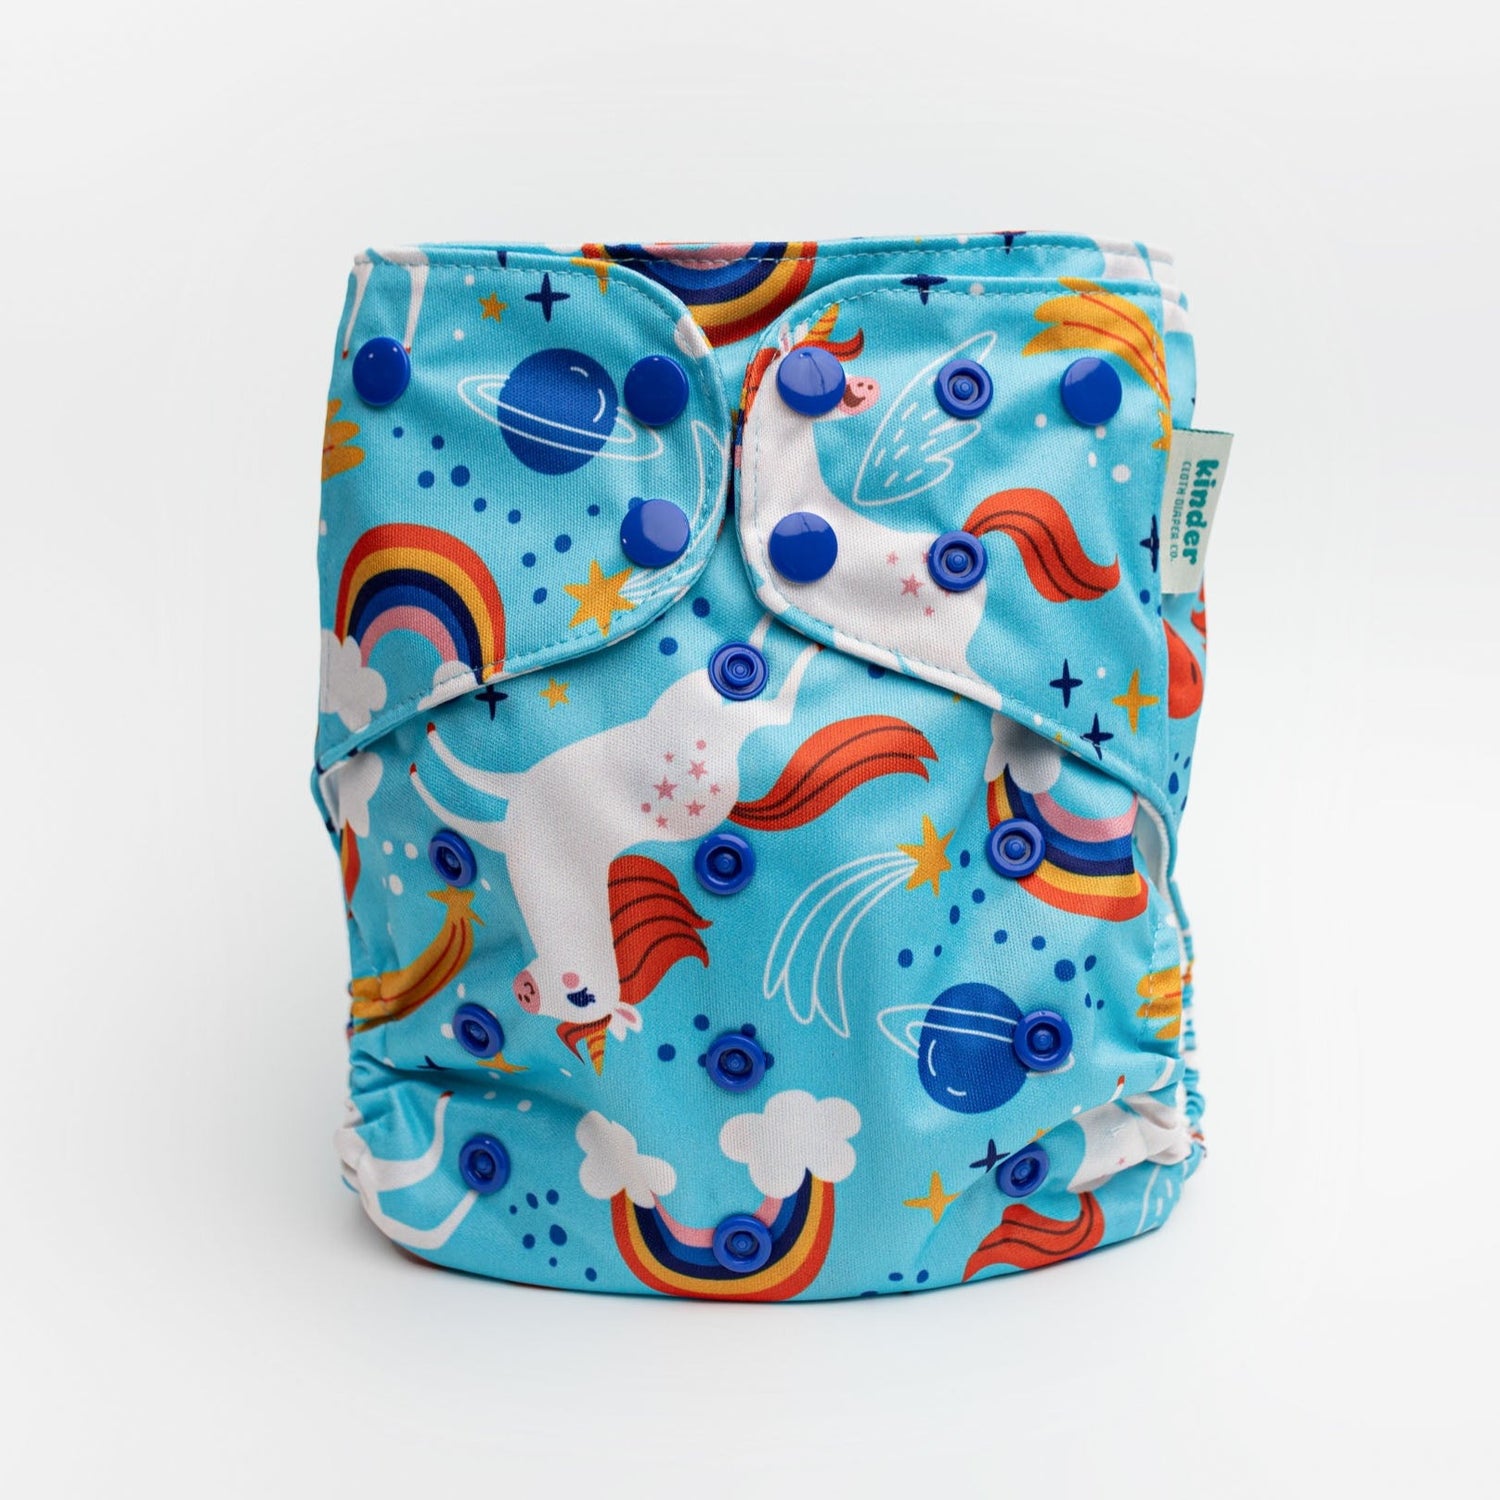 unicorns and rainbows modern pocket cloth diaper with awj kinder cloth diapers pittsburgh pa kids gender neutral fun and whimsical prints surface pattern design